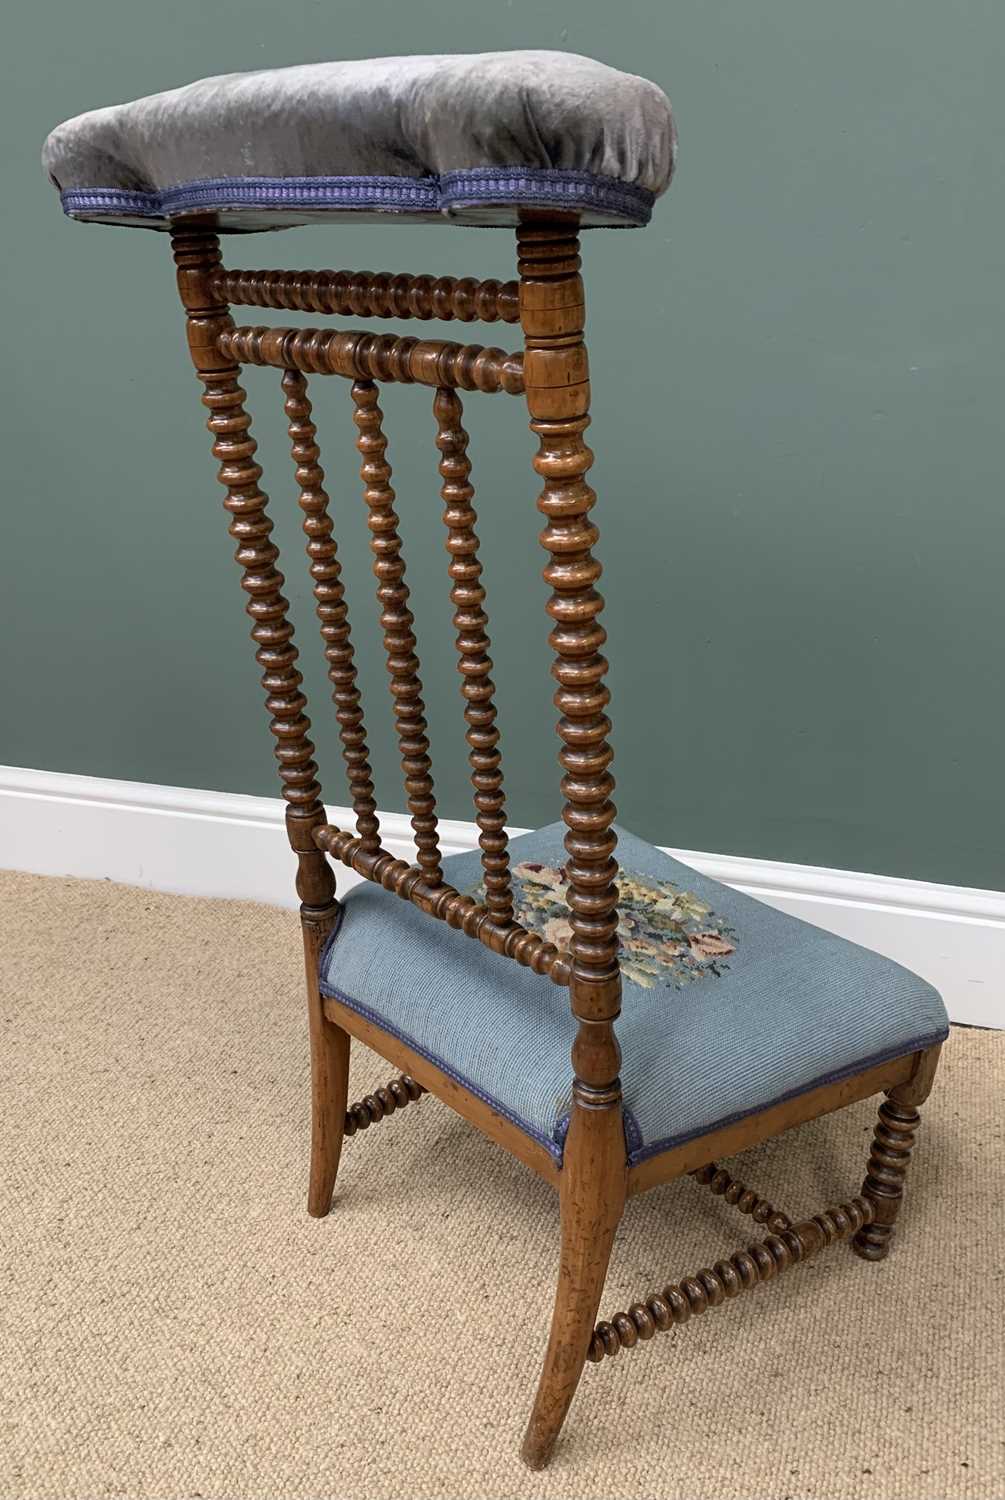 PRE-DIEU CHAIR, a walnut bobbin backed chair with padded top rail and tapestry seat, 94cms H, - Image 2 of 2